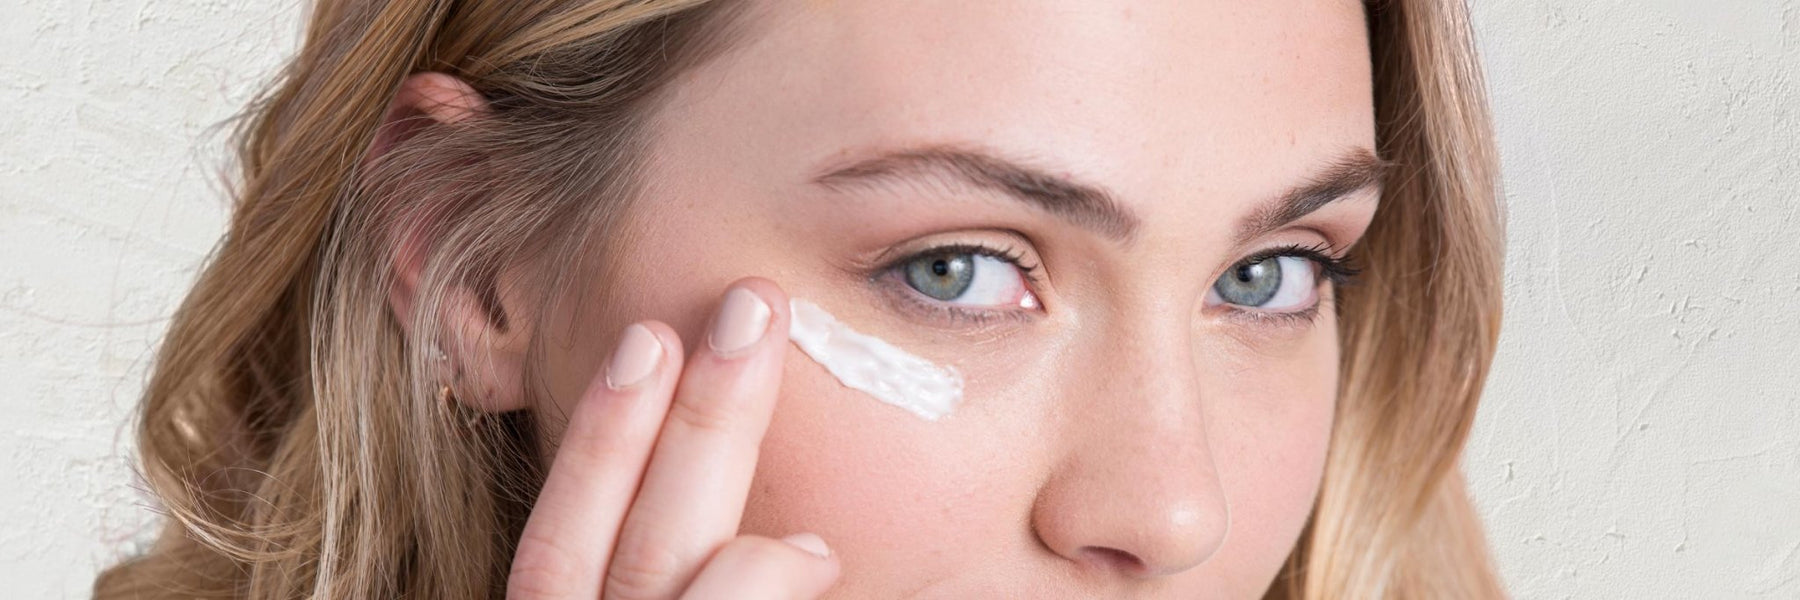 Puffy Eyes: What to Do About Puffy Eyes